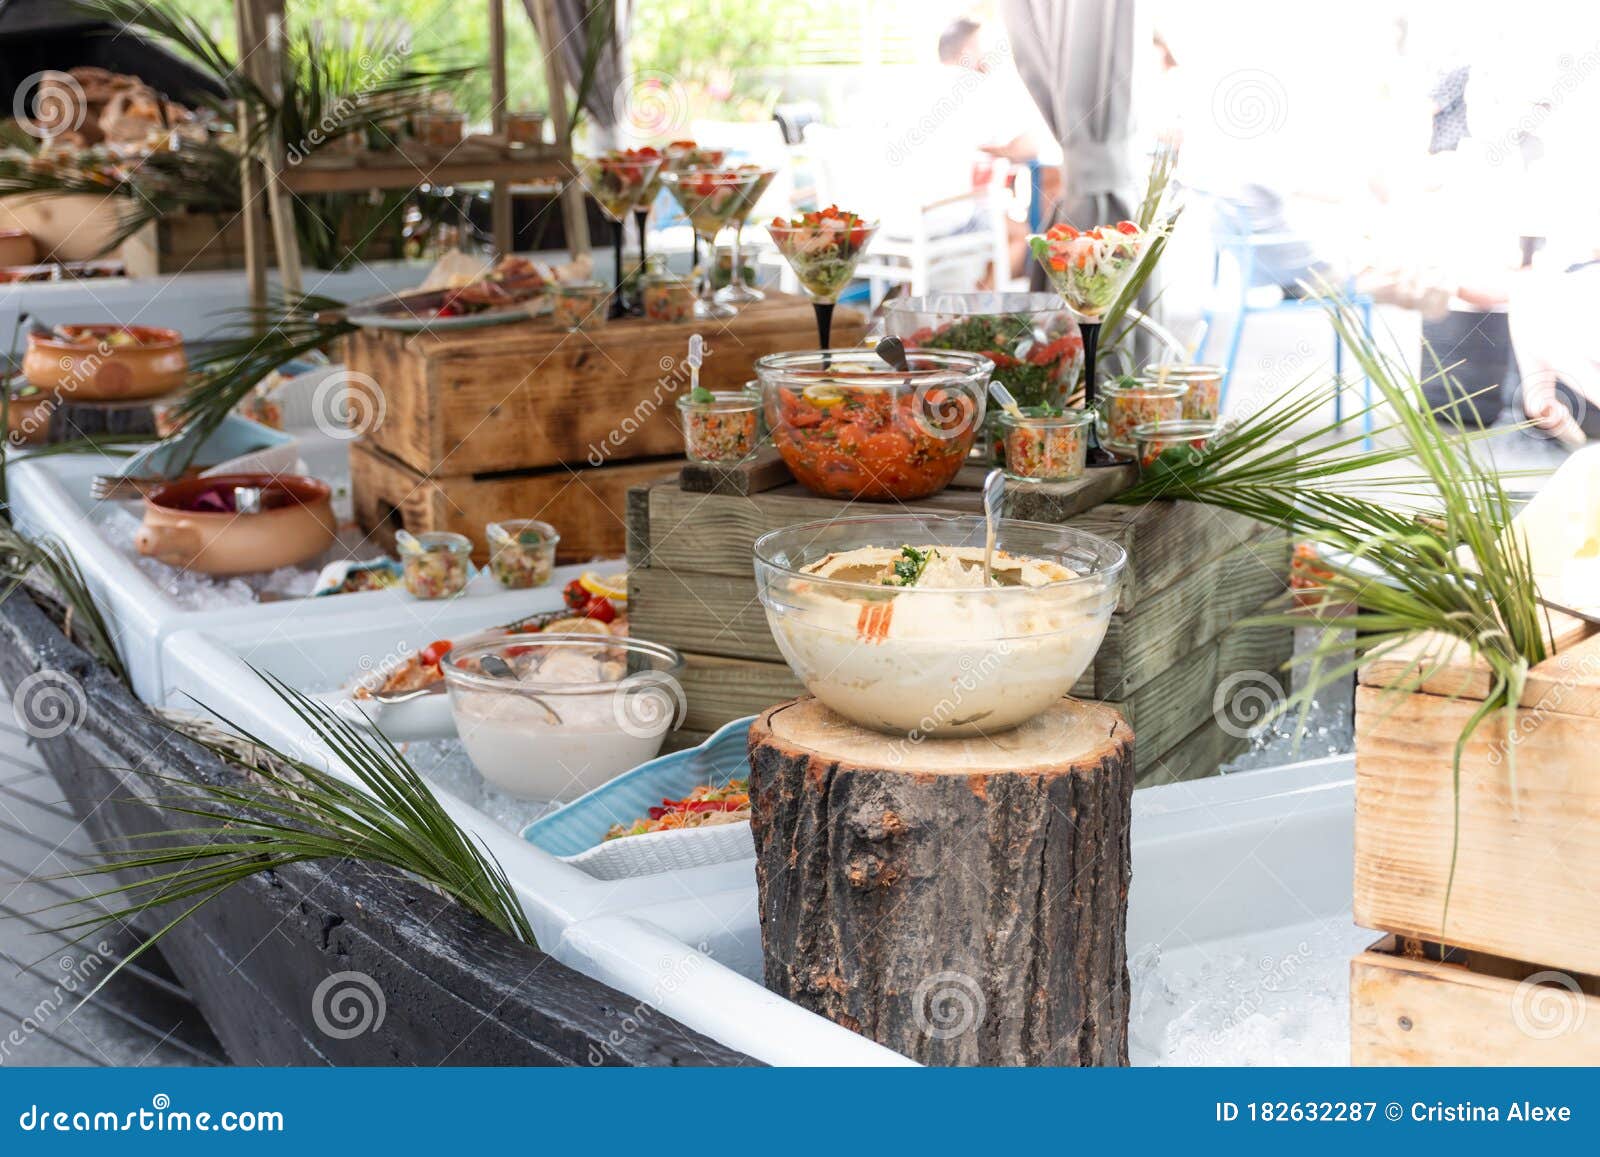 Luxury Catering By The Pool, Food Bloggers Event, Banquet, Wedding,  Festive, Hotel Brunch Buffet Stock Image - Image Of Cold, Luxurious:  182632287